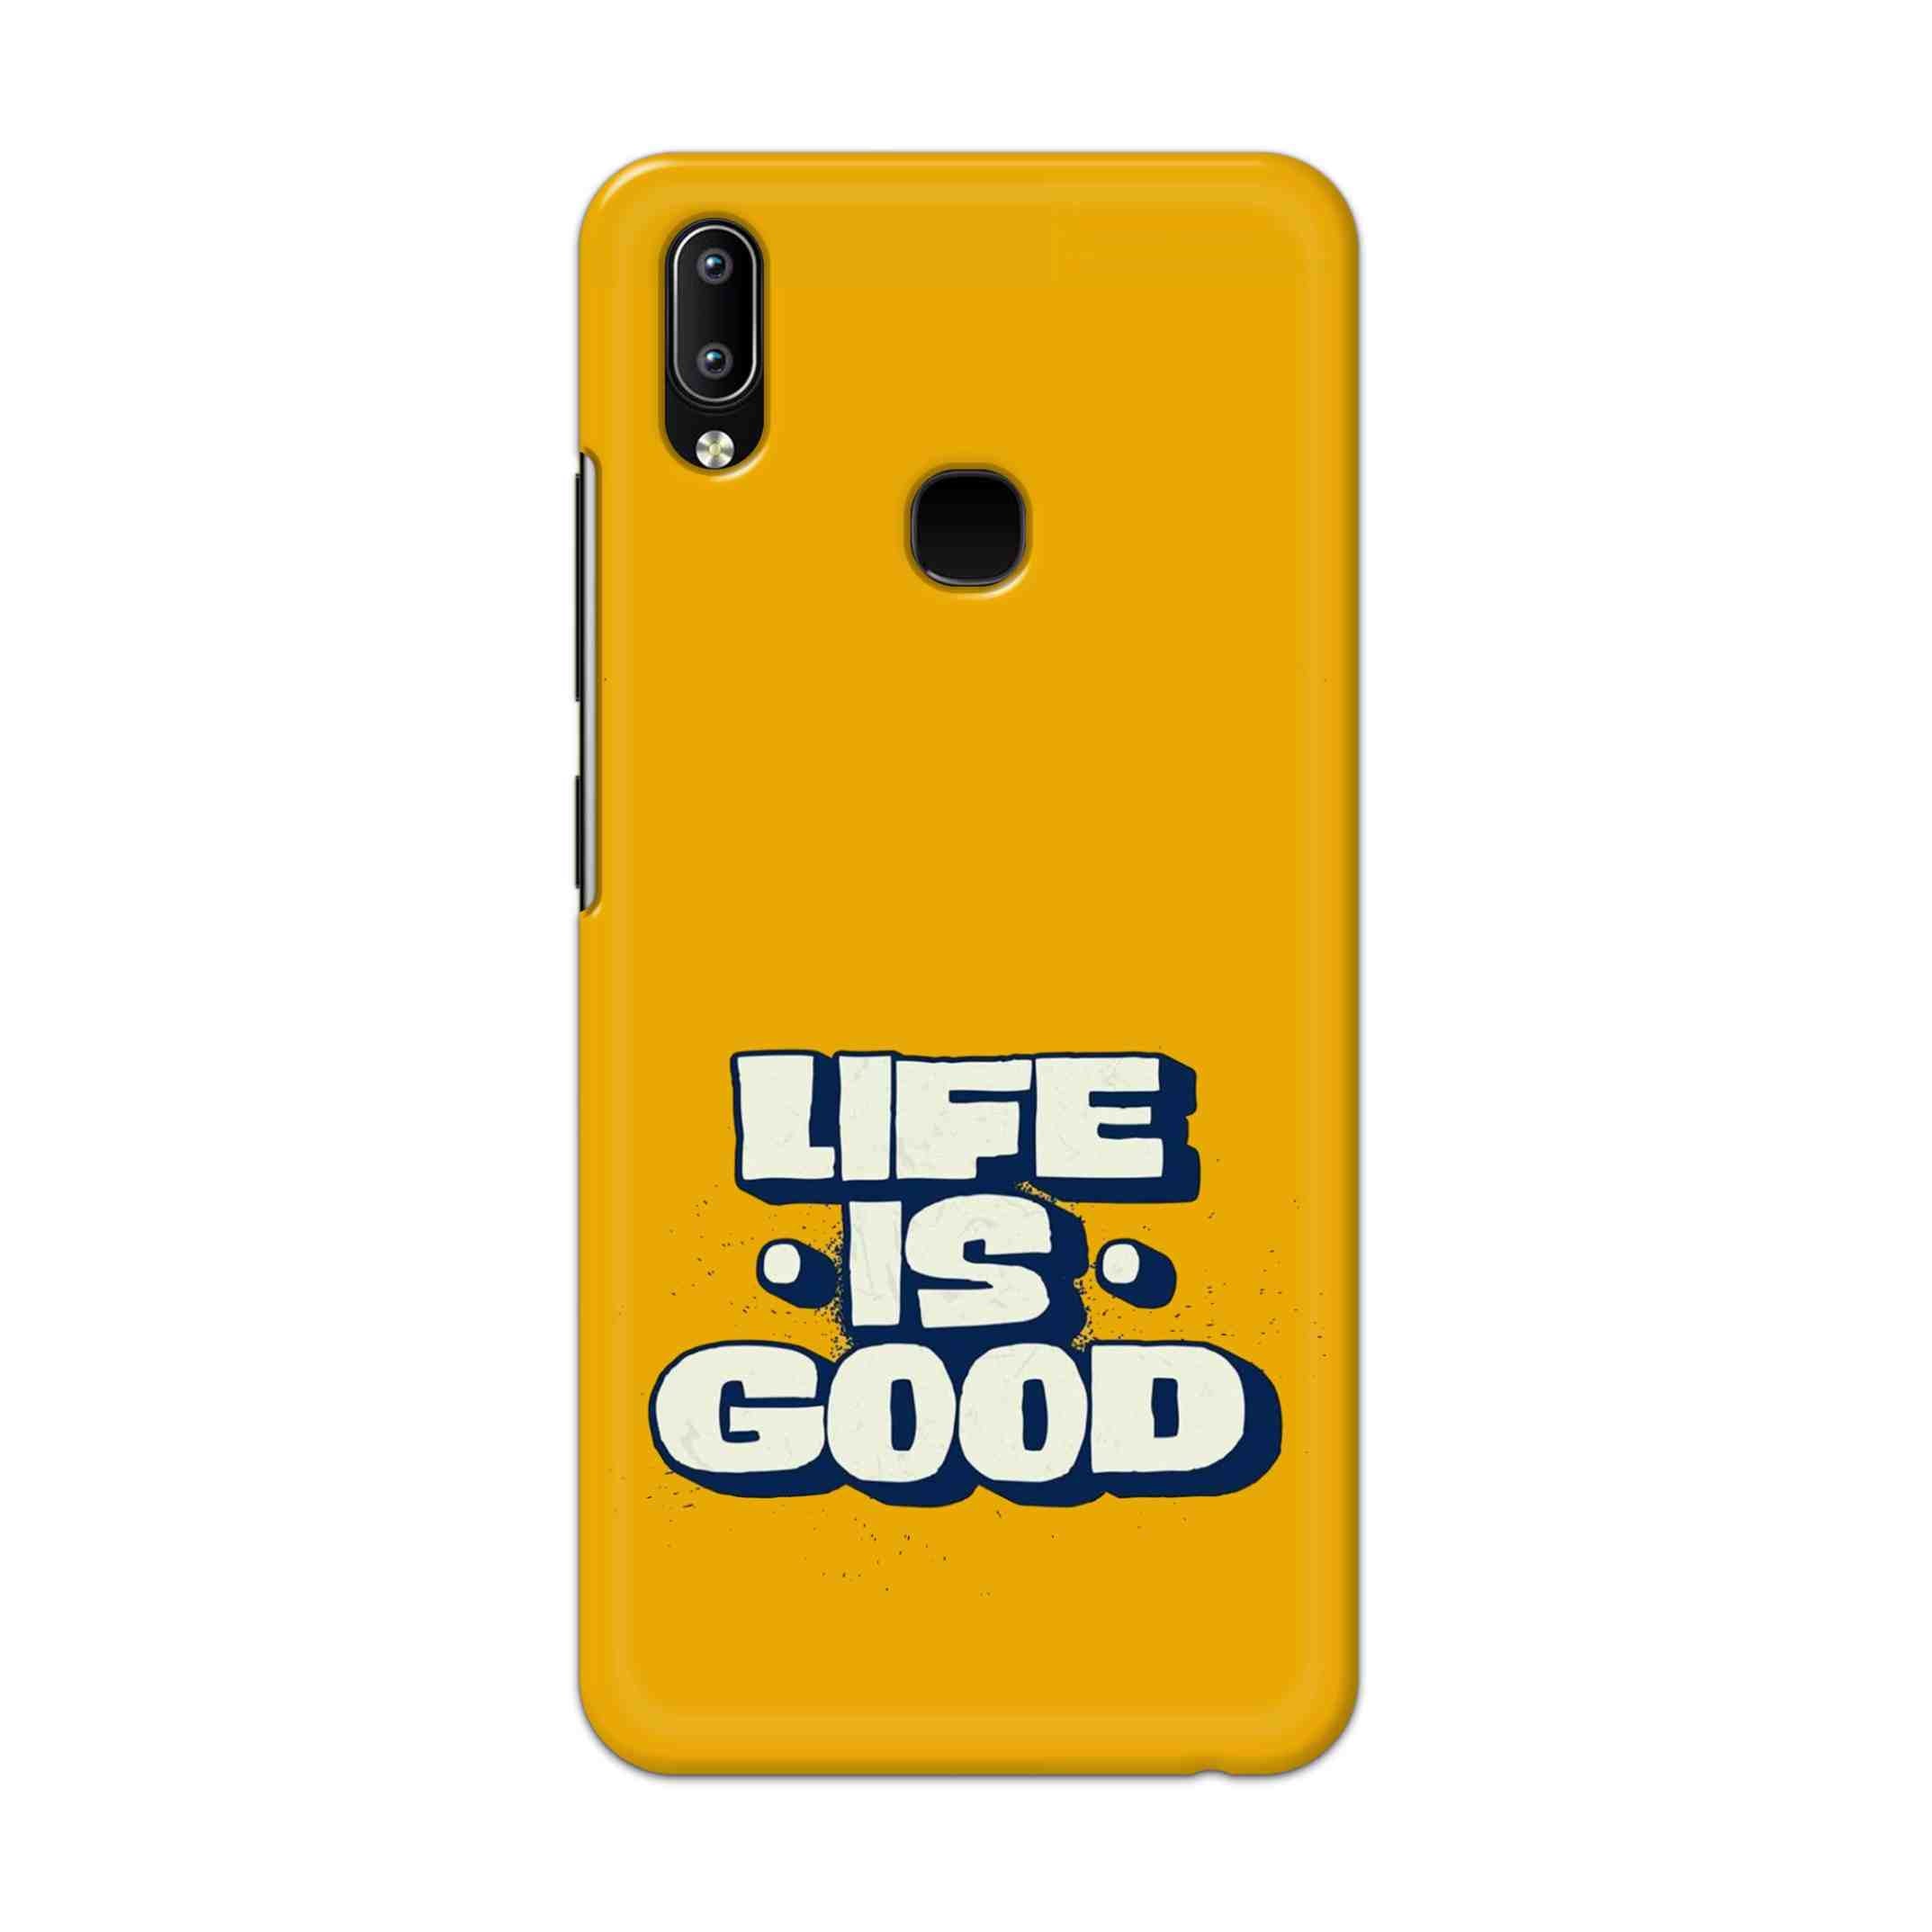 Buy Life Is Good Hard Back Mobile Phone Case Cover For Vivo Y95 / Y93 / Y91 Online